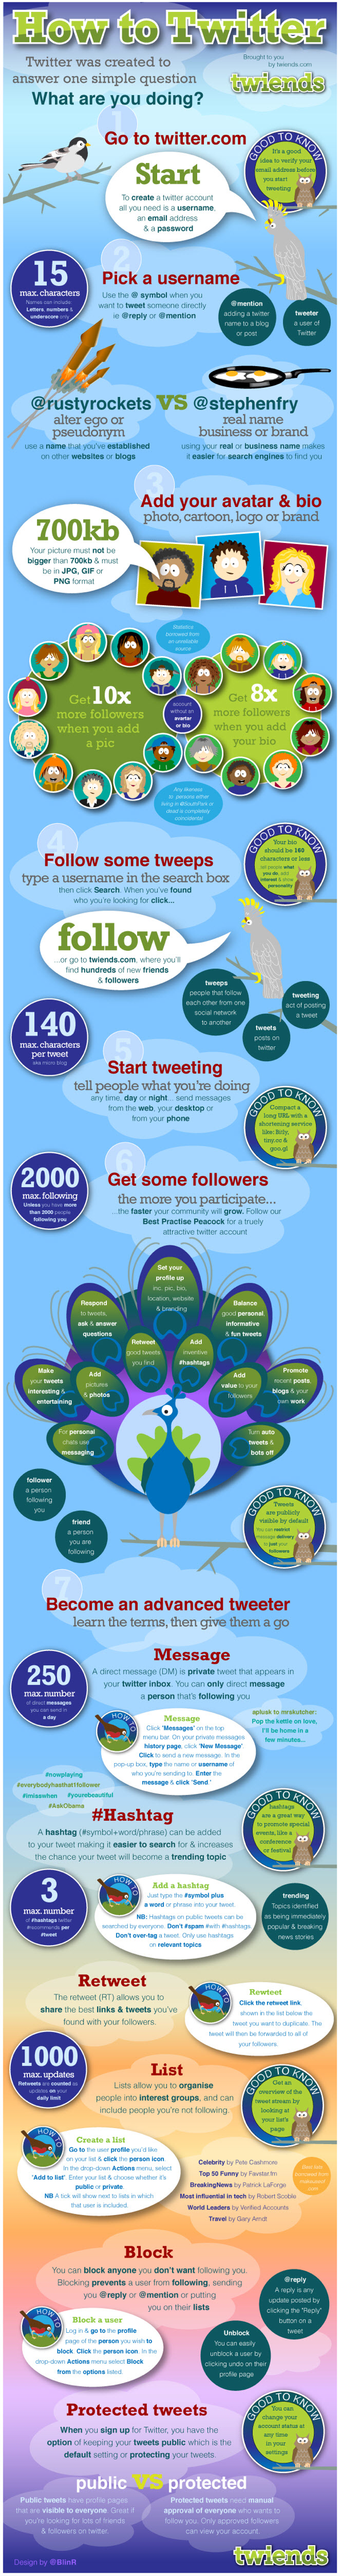 How-to-use-Twitter-Marketing-Infographic